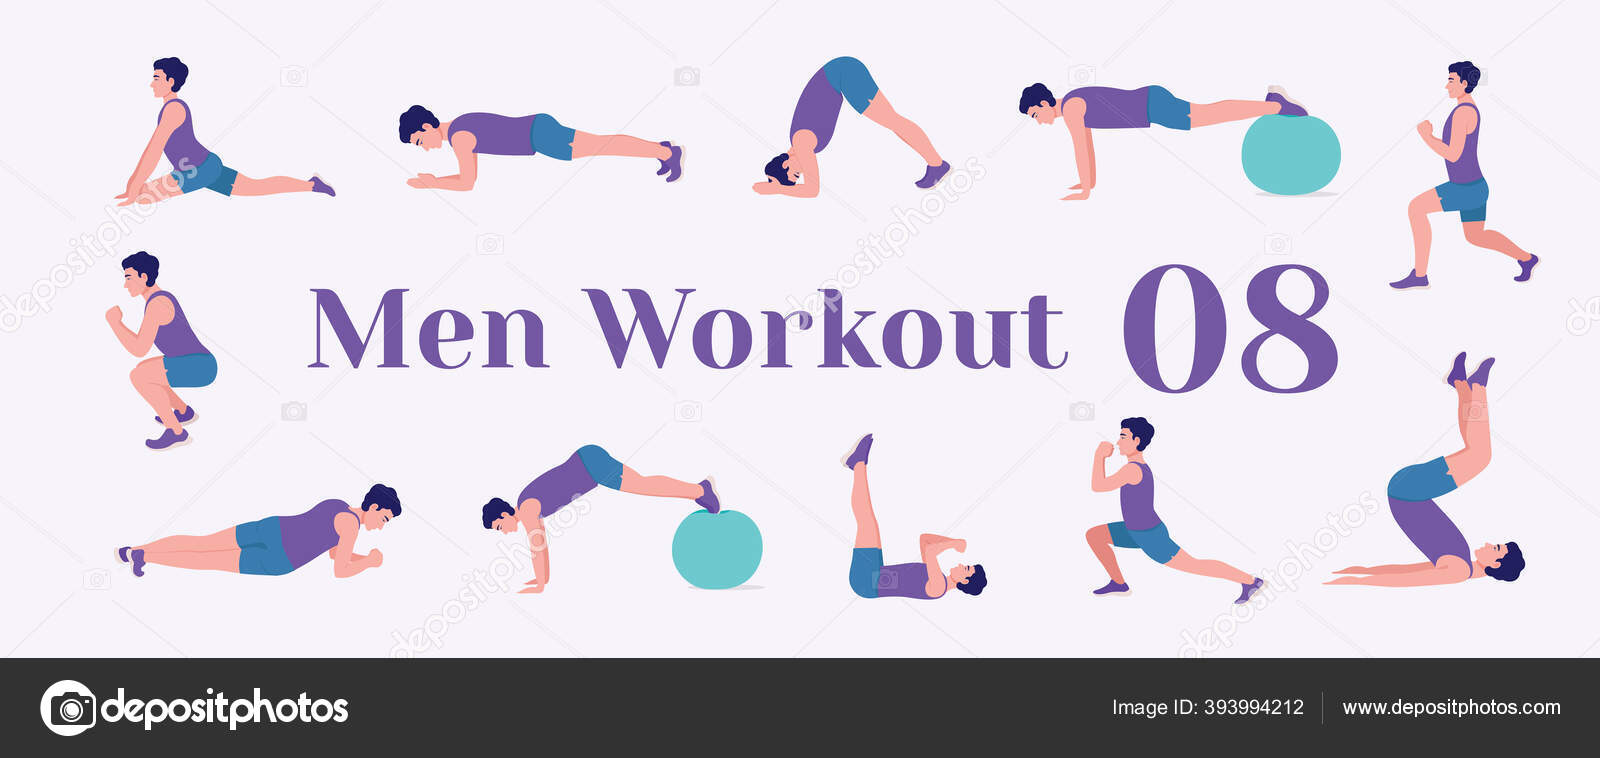 Women Workout Set. Women doing fitness and yoga exercises. Lunges, Pushups,  Squats, Dumbbell rows, Burpees, Side planks, Situps, Glute bridge, Leg  Raise, Russian Twist, Side Crunch .etc Stock Vector